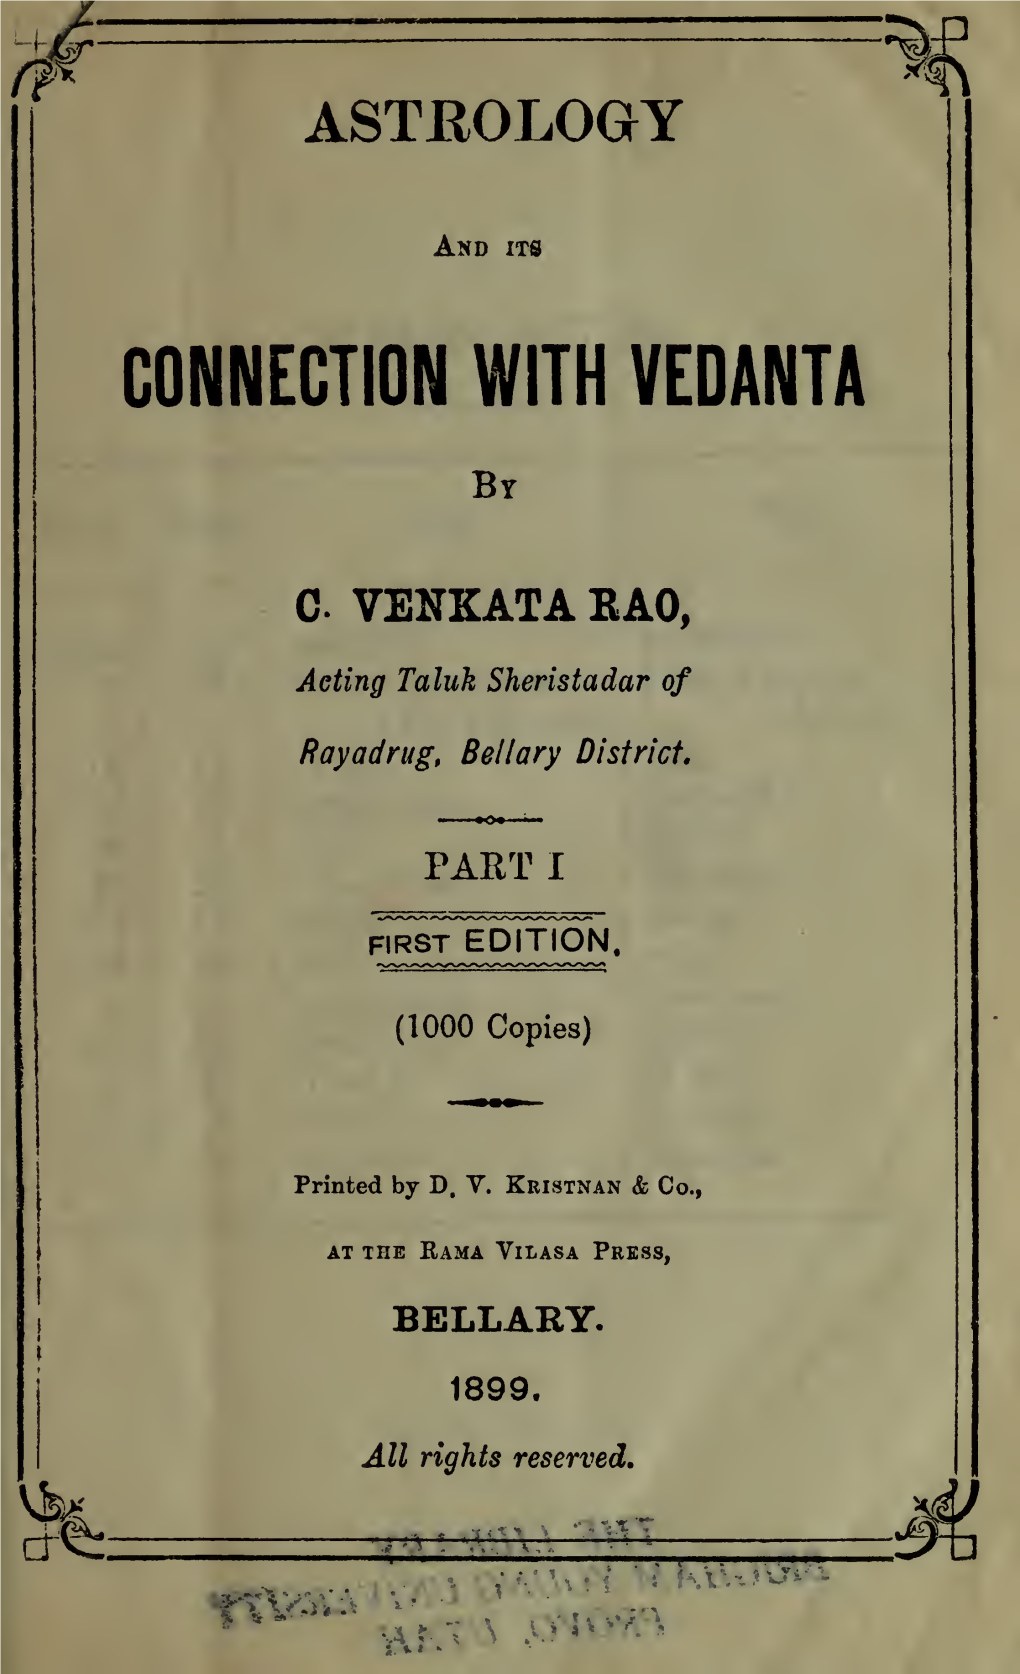 Astrology and Its Connection with Vedanta